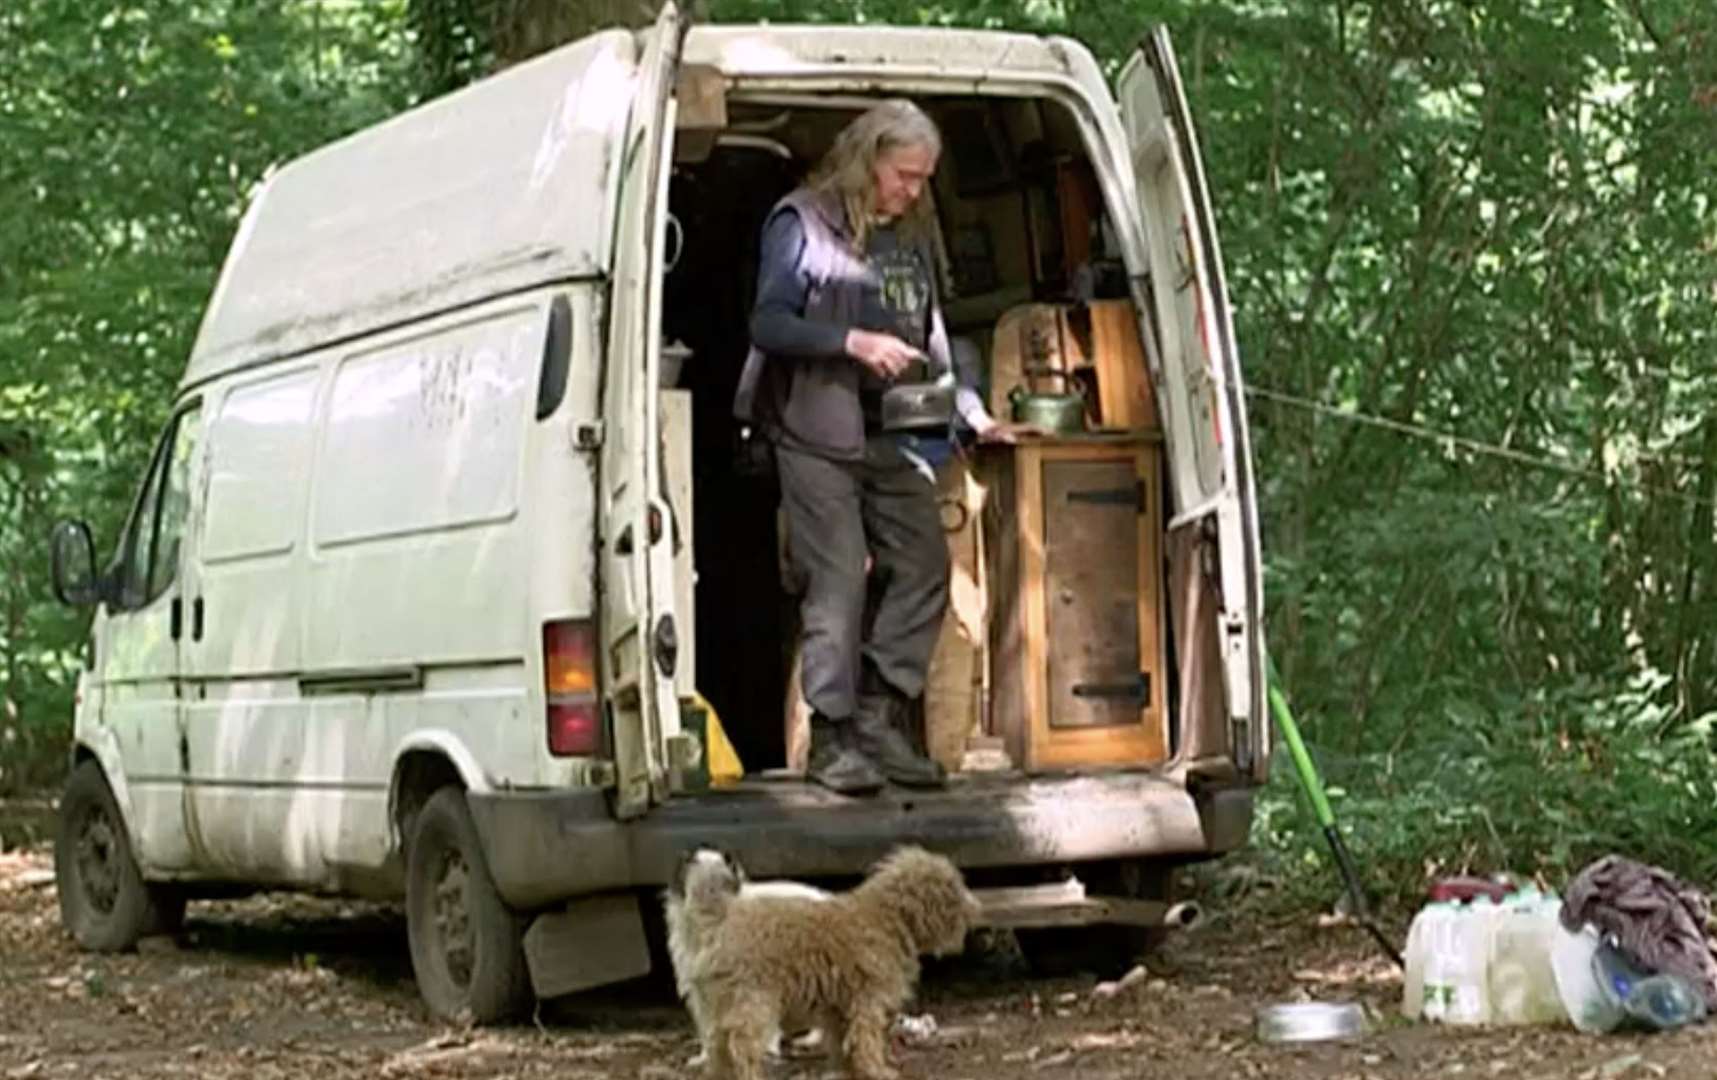 Jim Shilling spoke to the BBC in 2017 about life living in a van in the woods in Painters Forstal, near Faversham. Credit: BBC